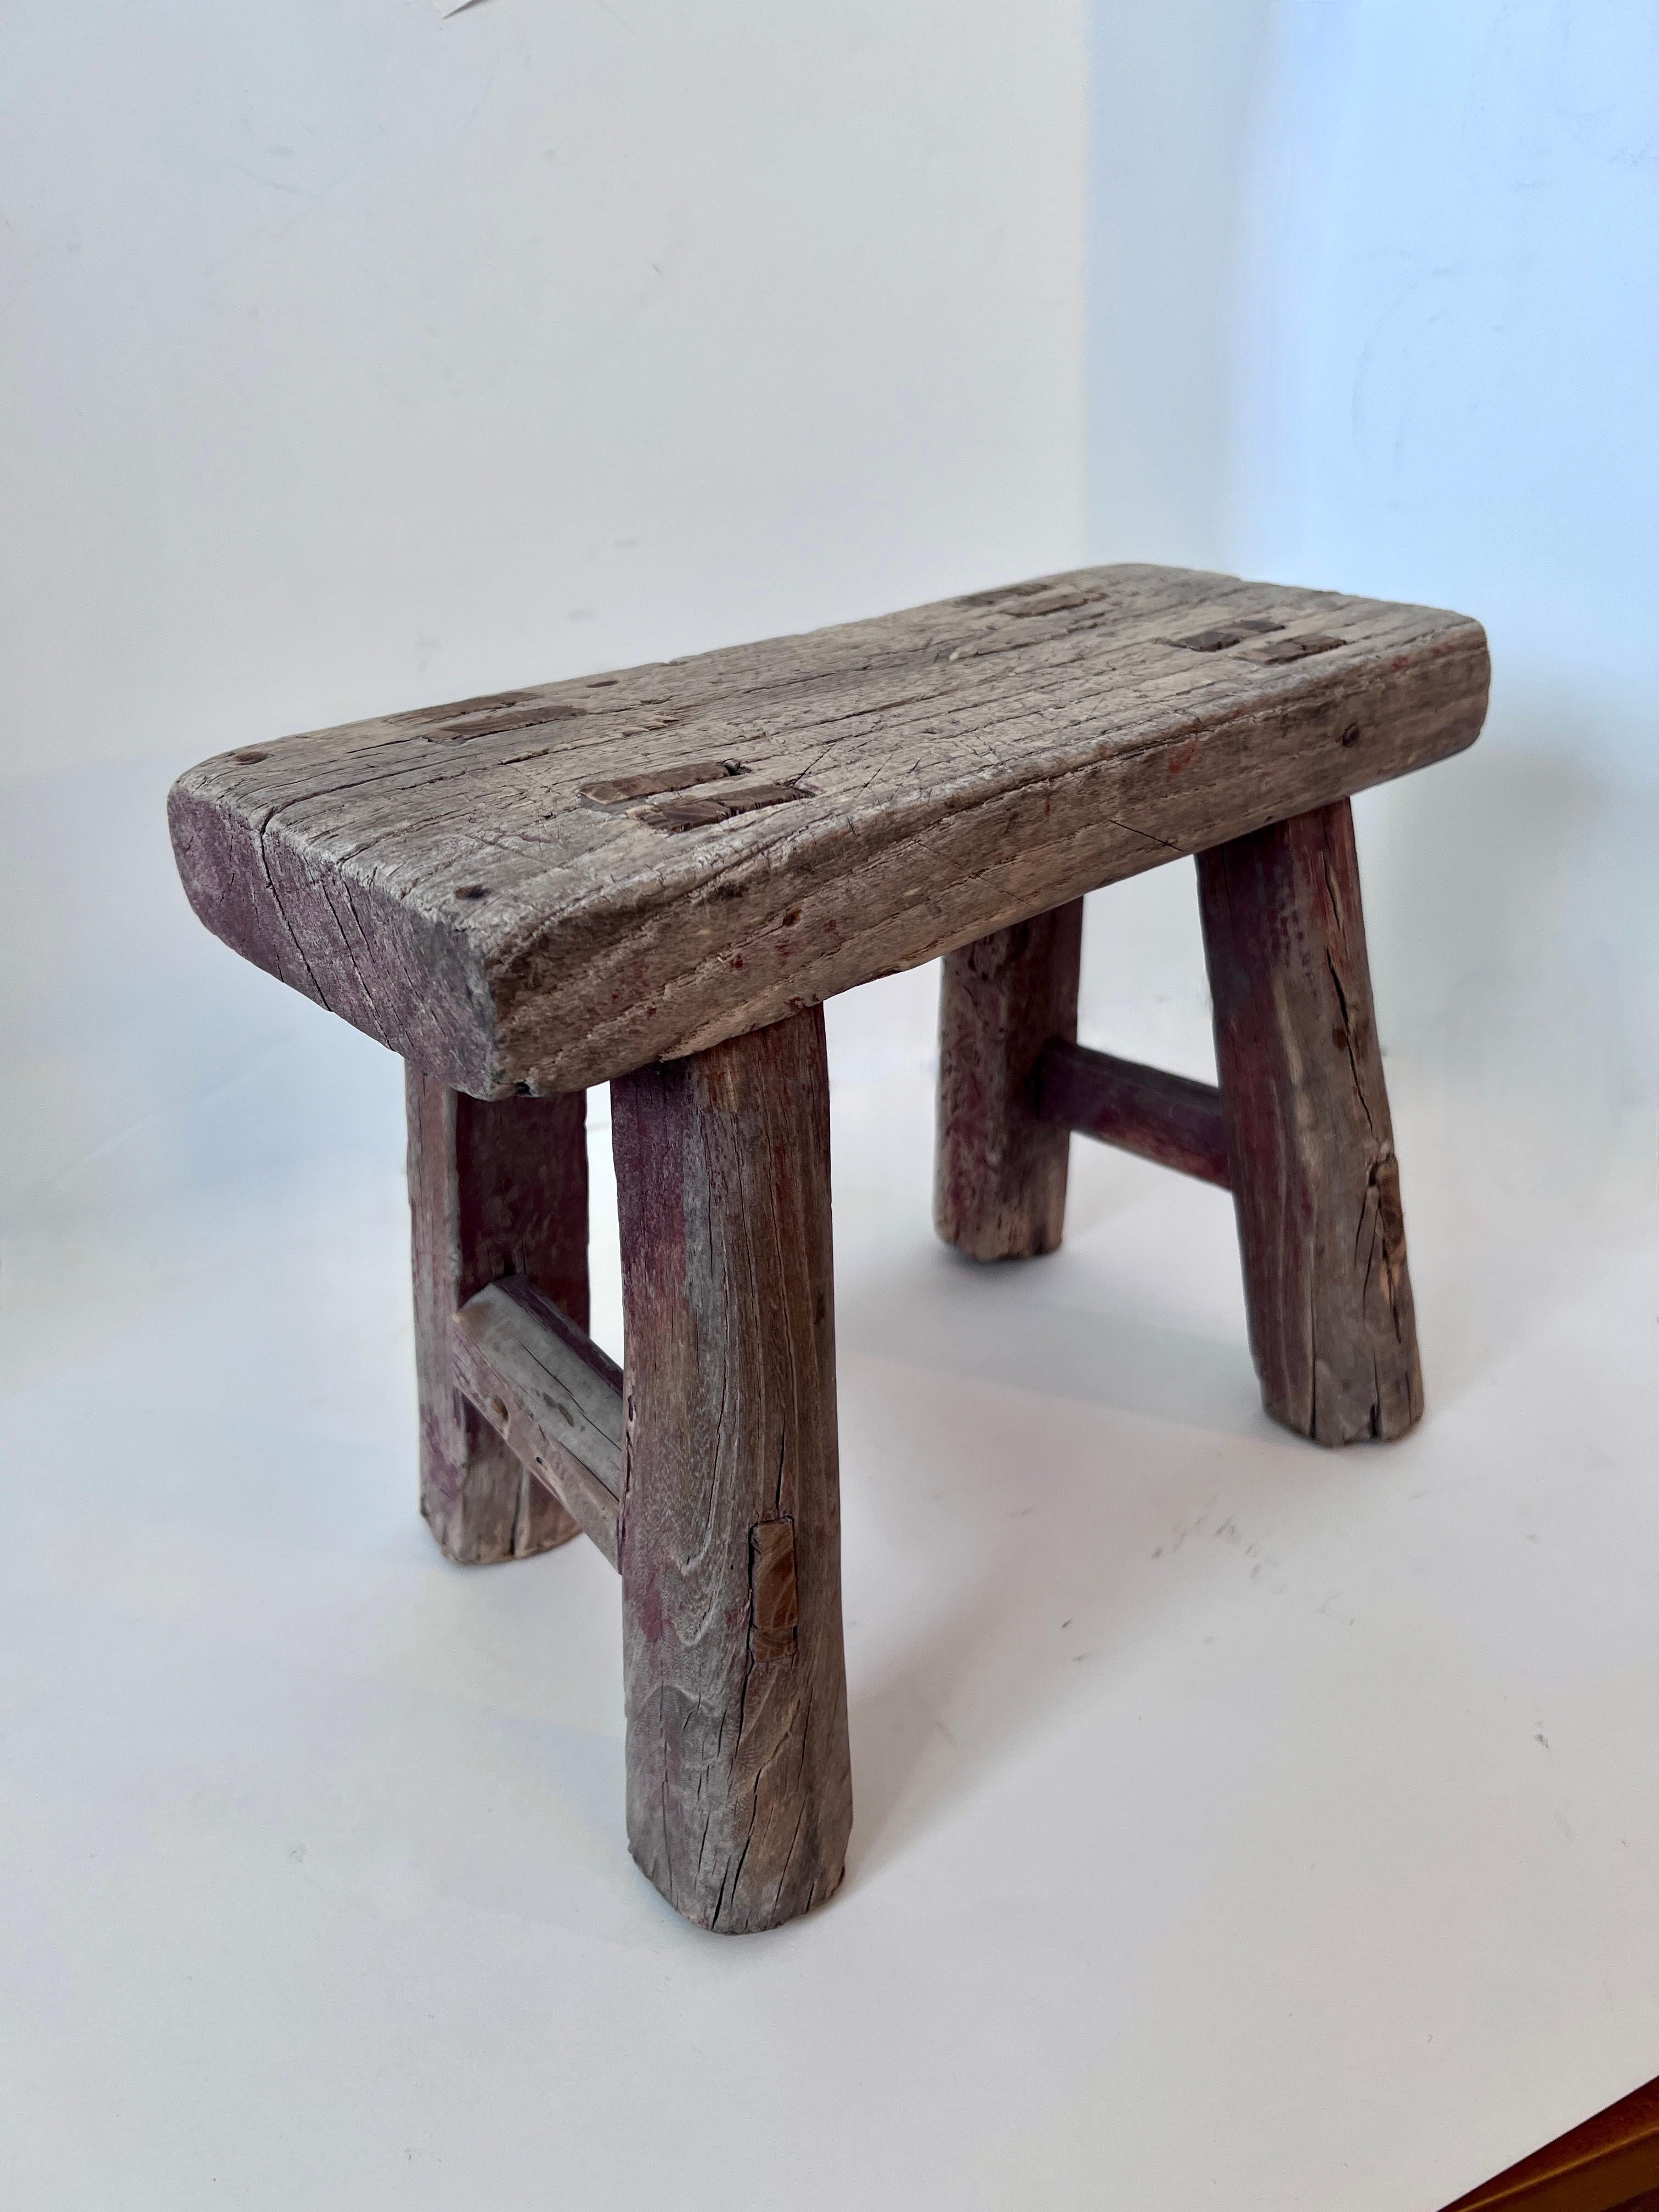 A wonderfully patinated Elm Wood Stool originating in China.  The wood is beautifully worn and in sturdy usable condition.

A compliment to many spaces and works well underneath a console or side table - pull out to seat children or to put up ones